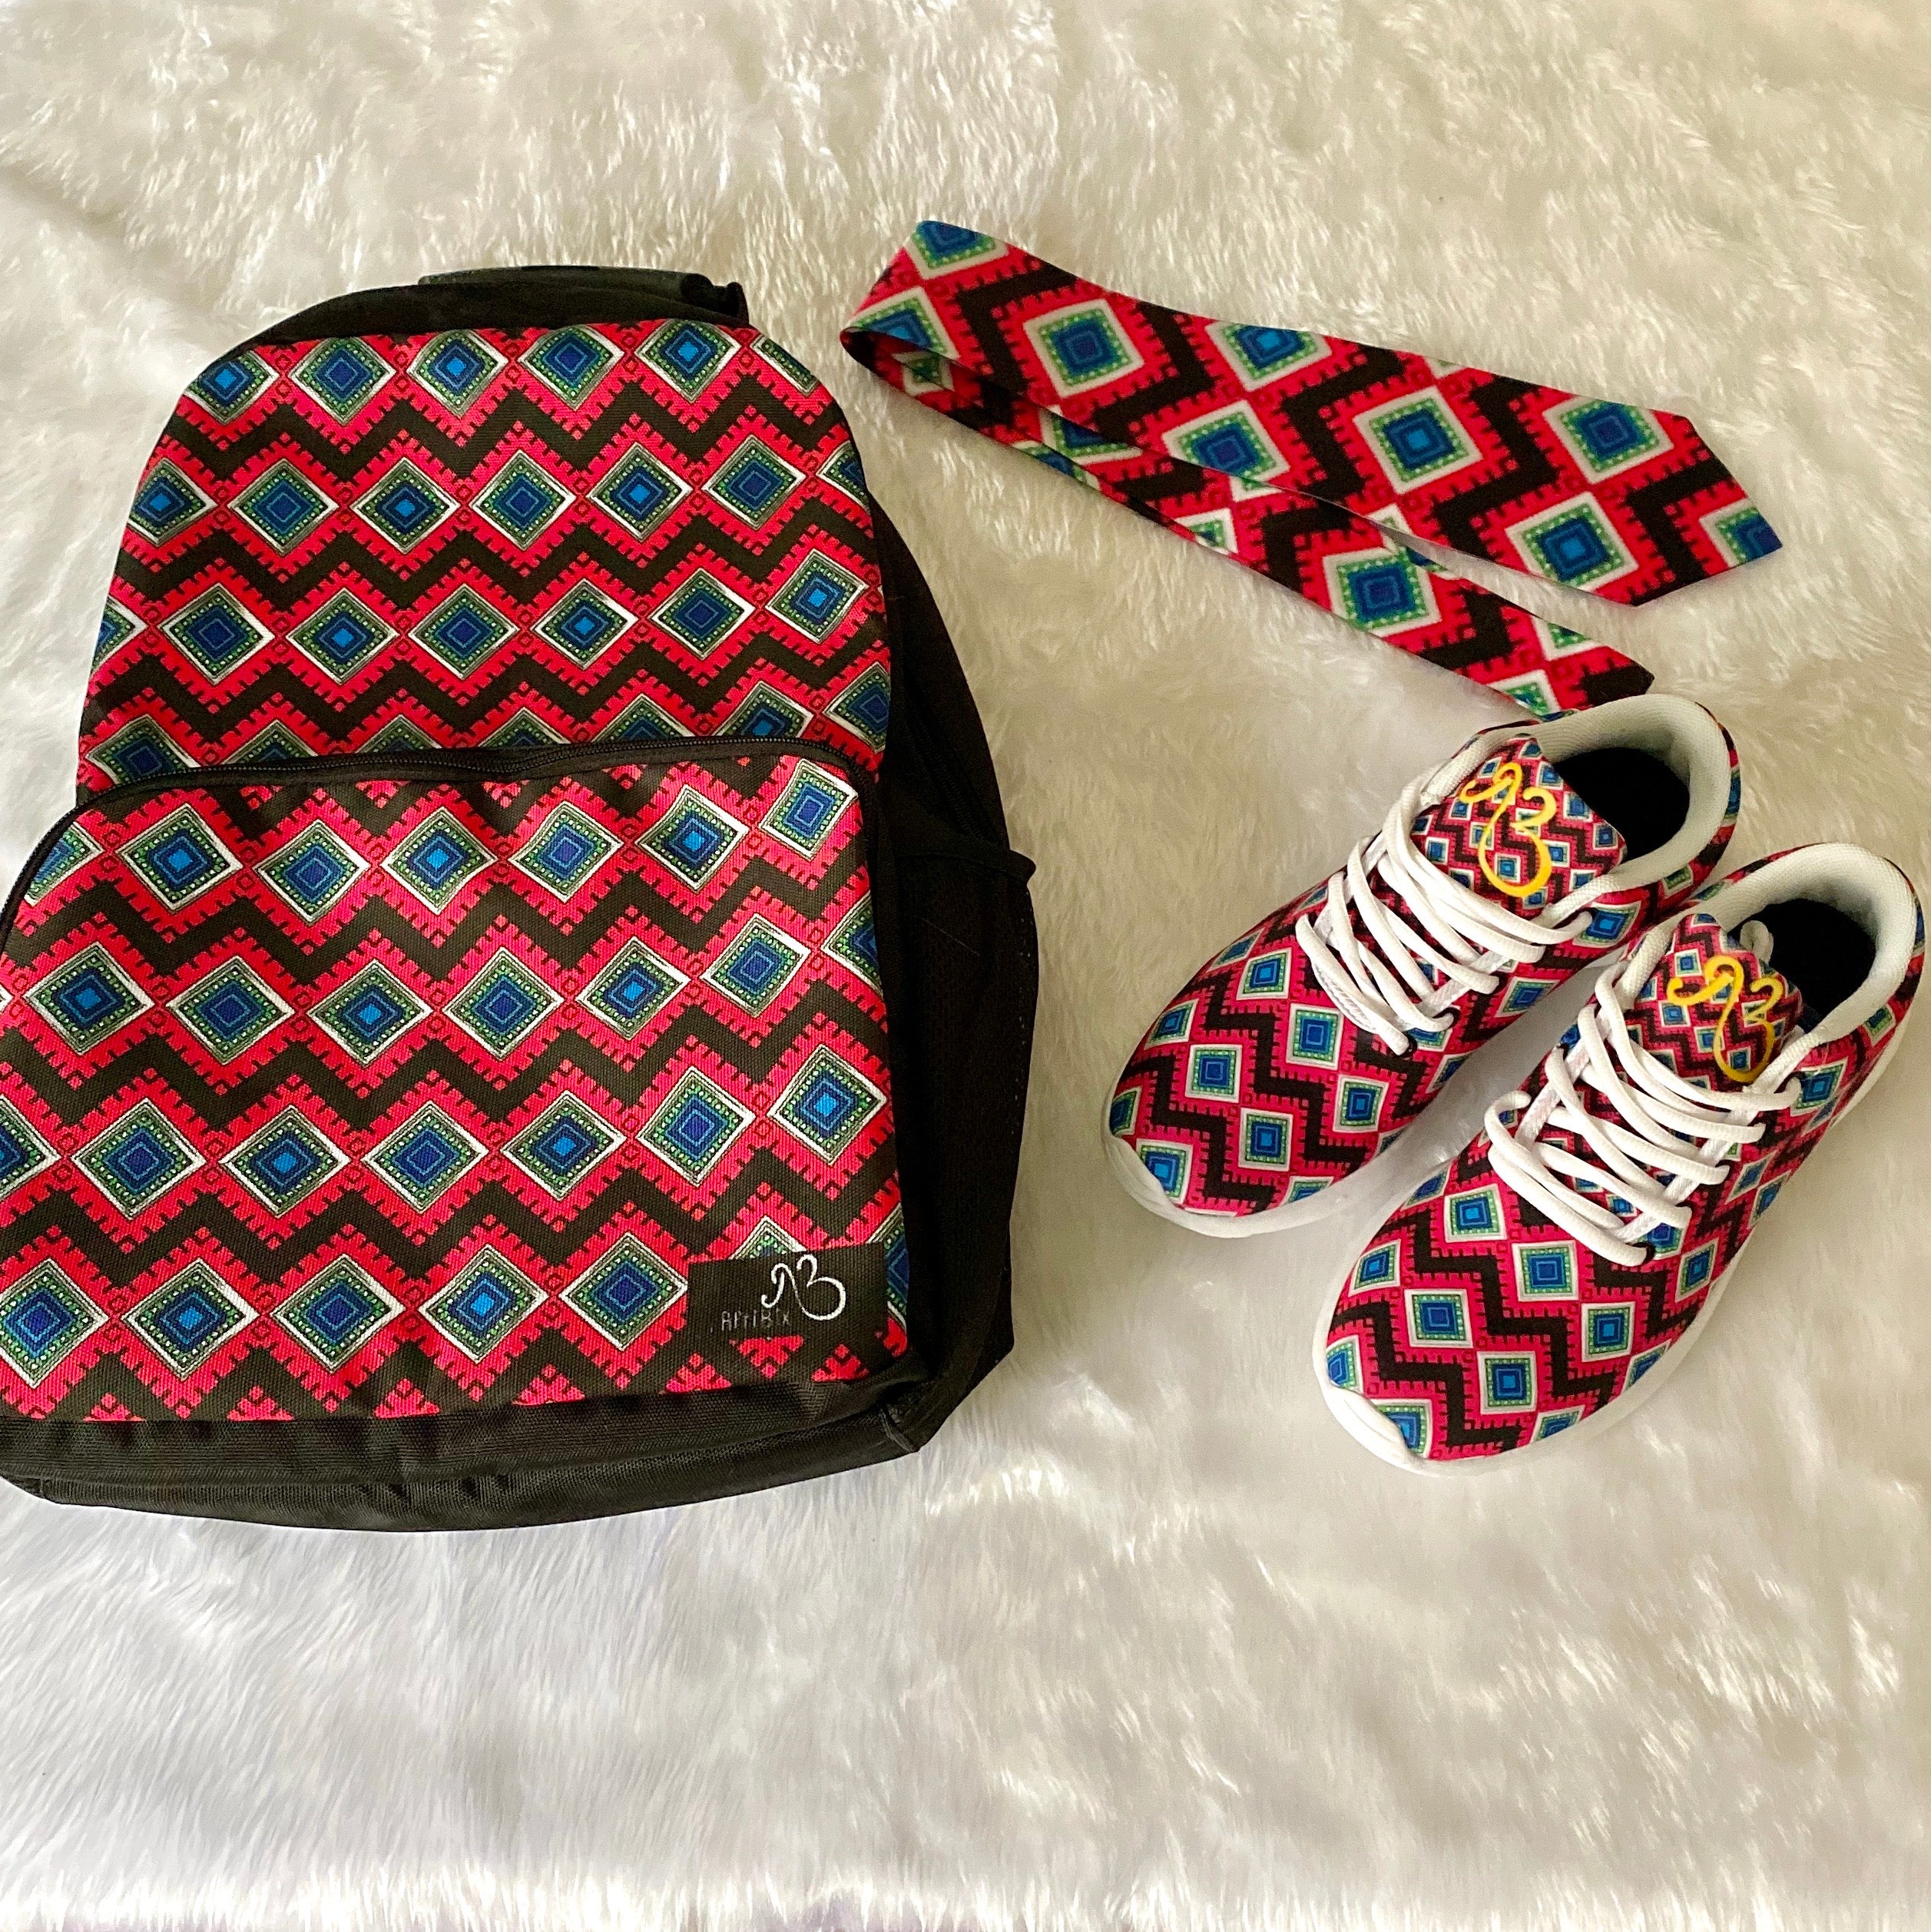 Afribix backpack and trainers in african print